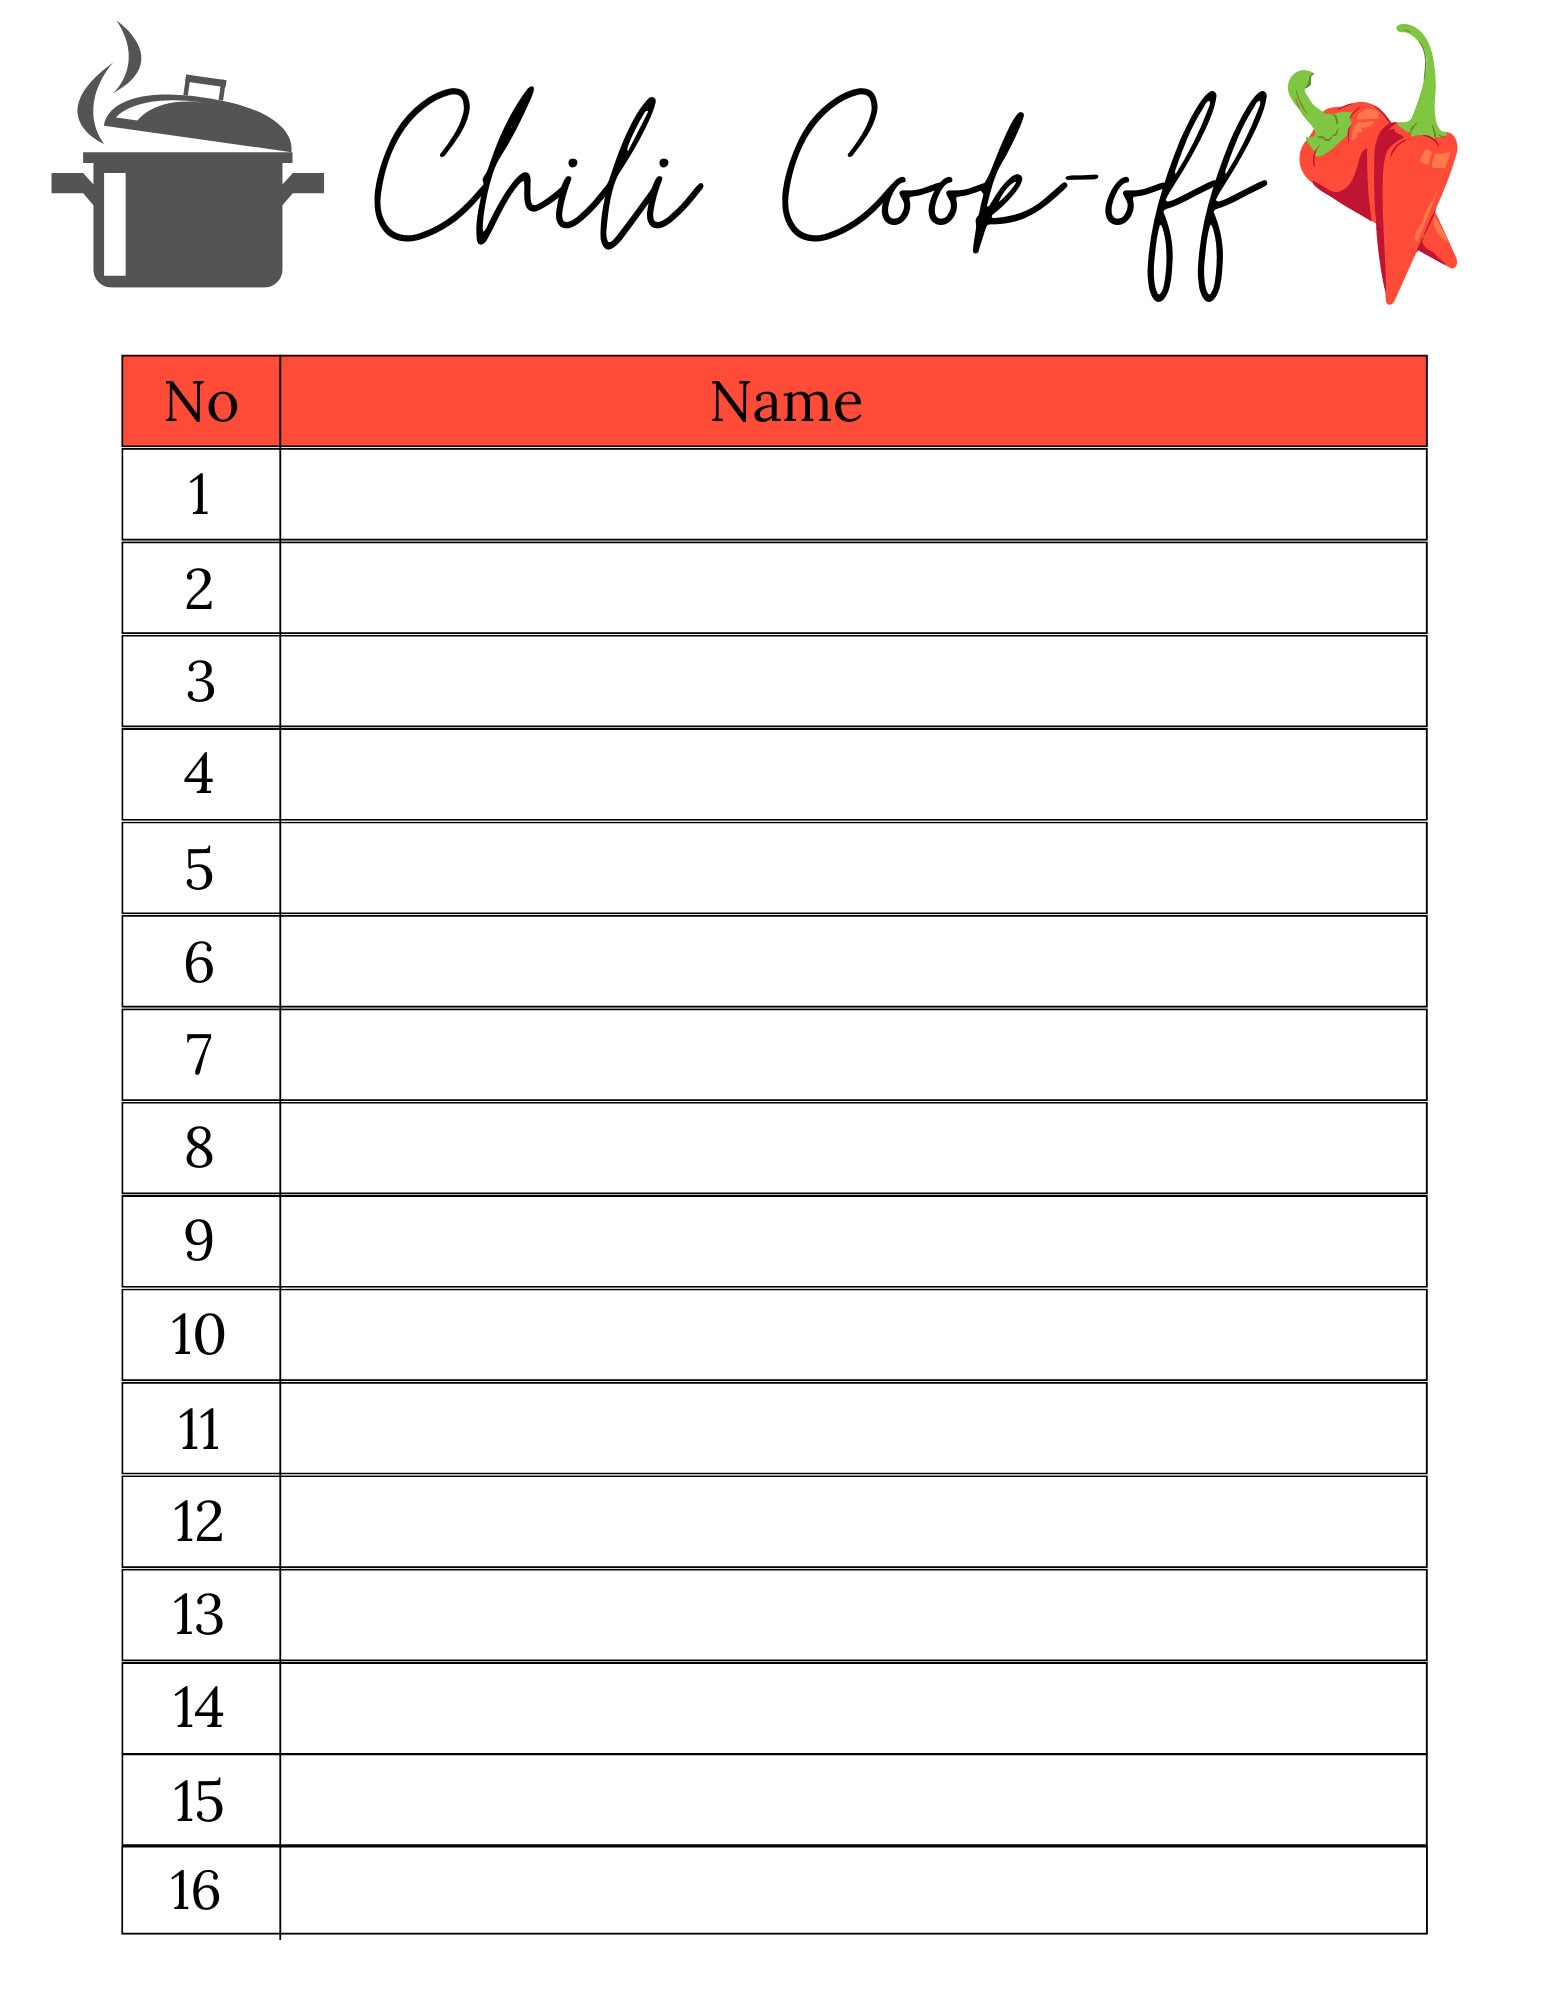 Chili Cook-off Sign up Sheet Chili Cook off Sheet Chili - Etsy